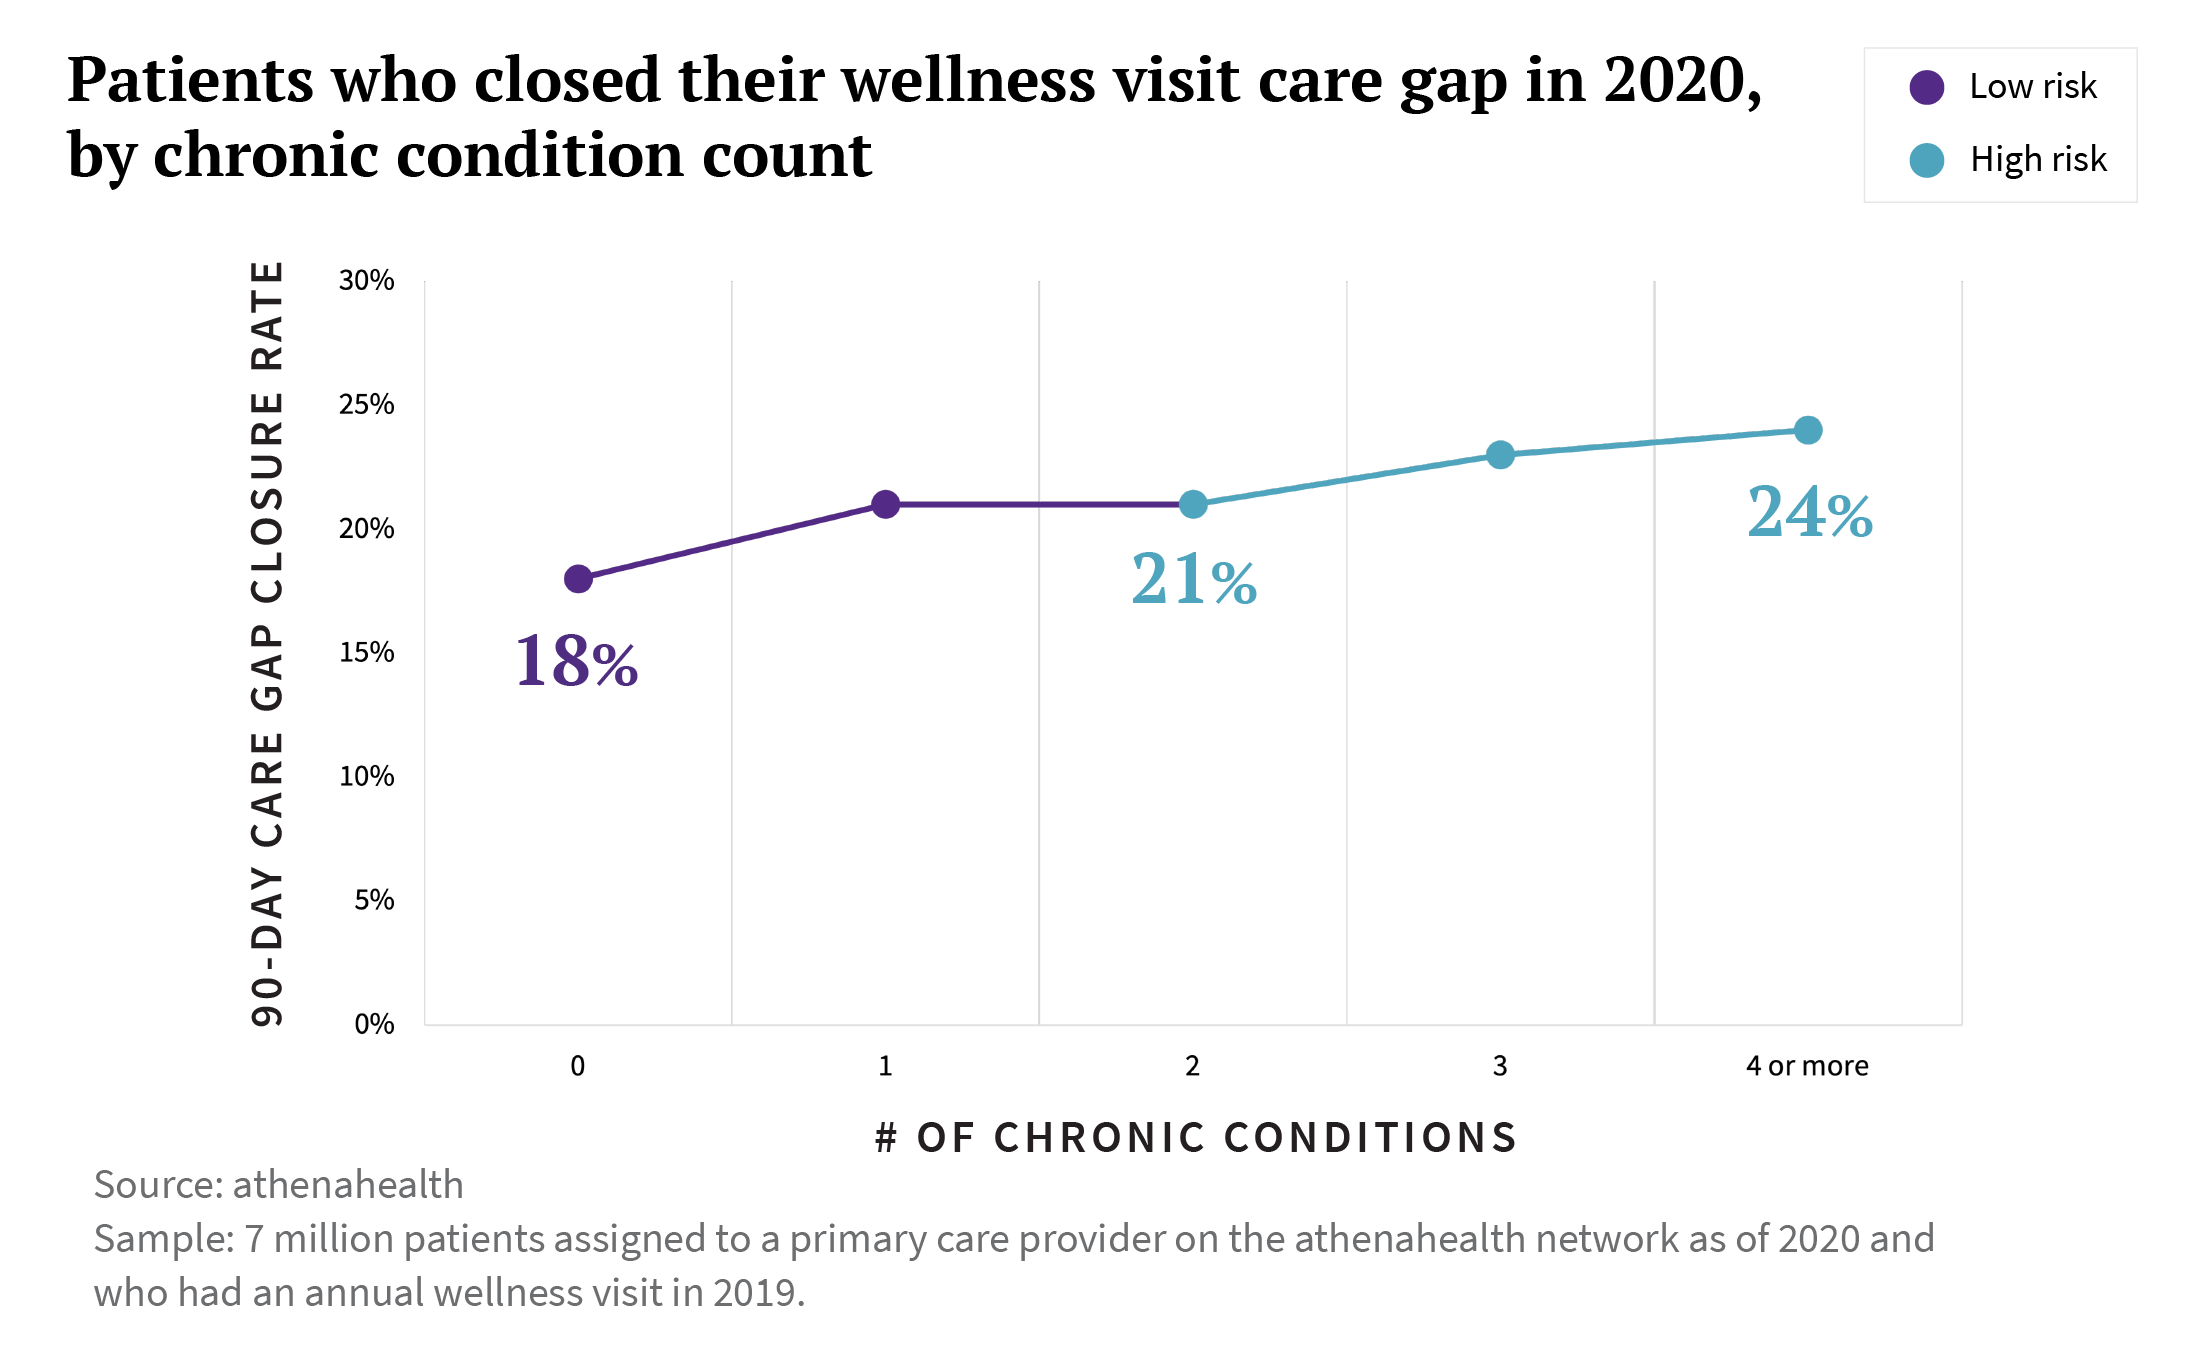 Chart showing patients who closed their care gap in 2020 by chronic condition count